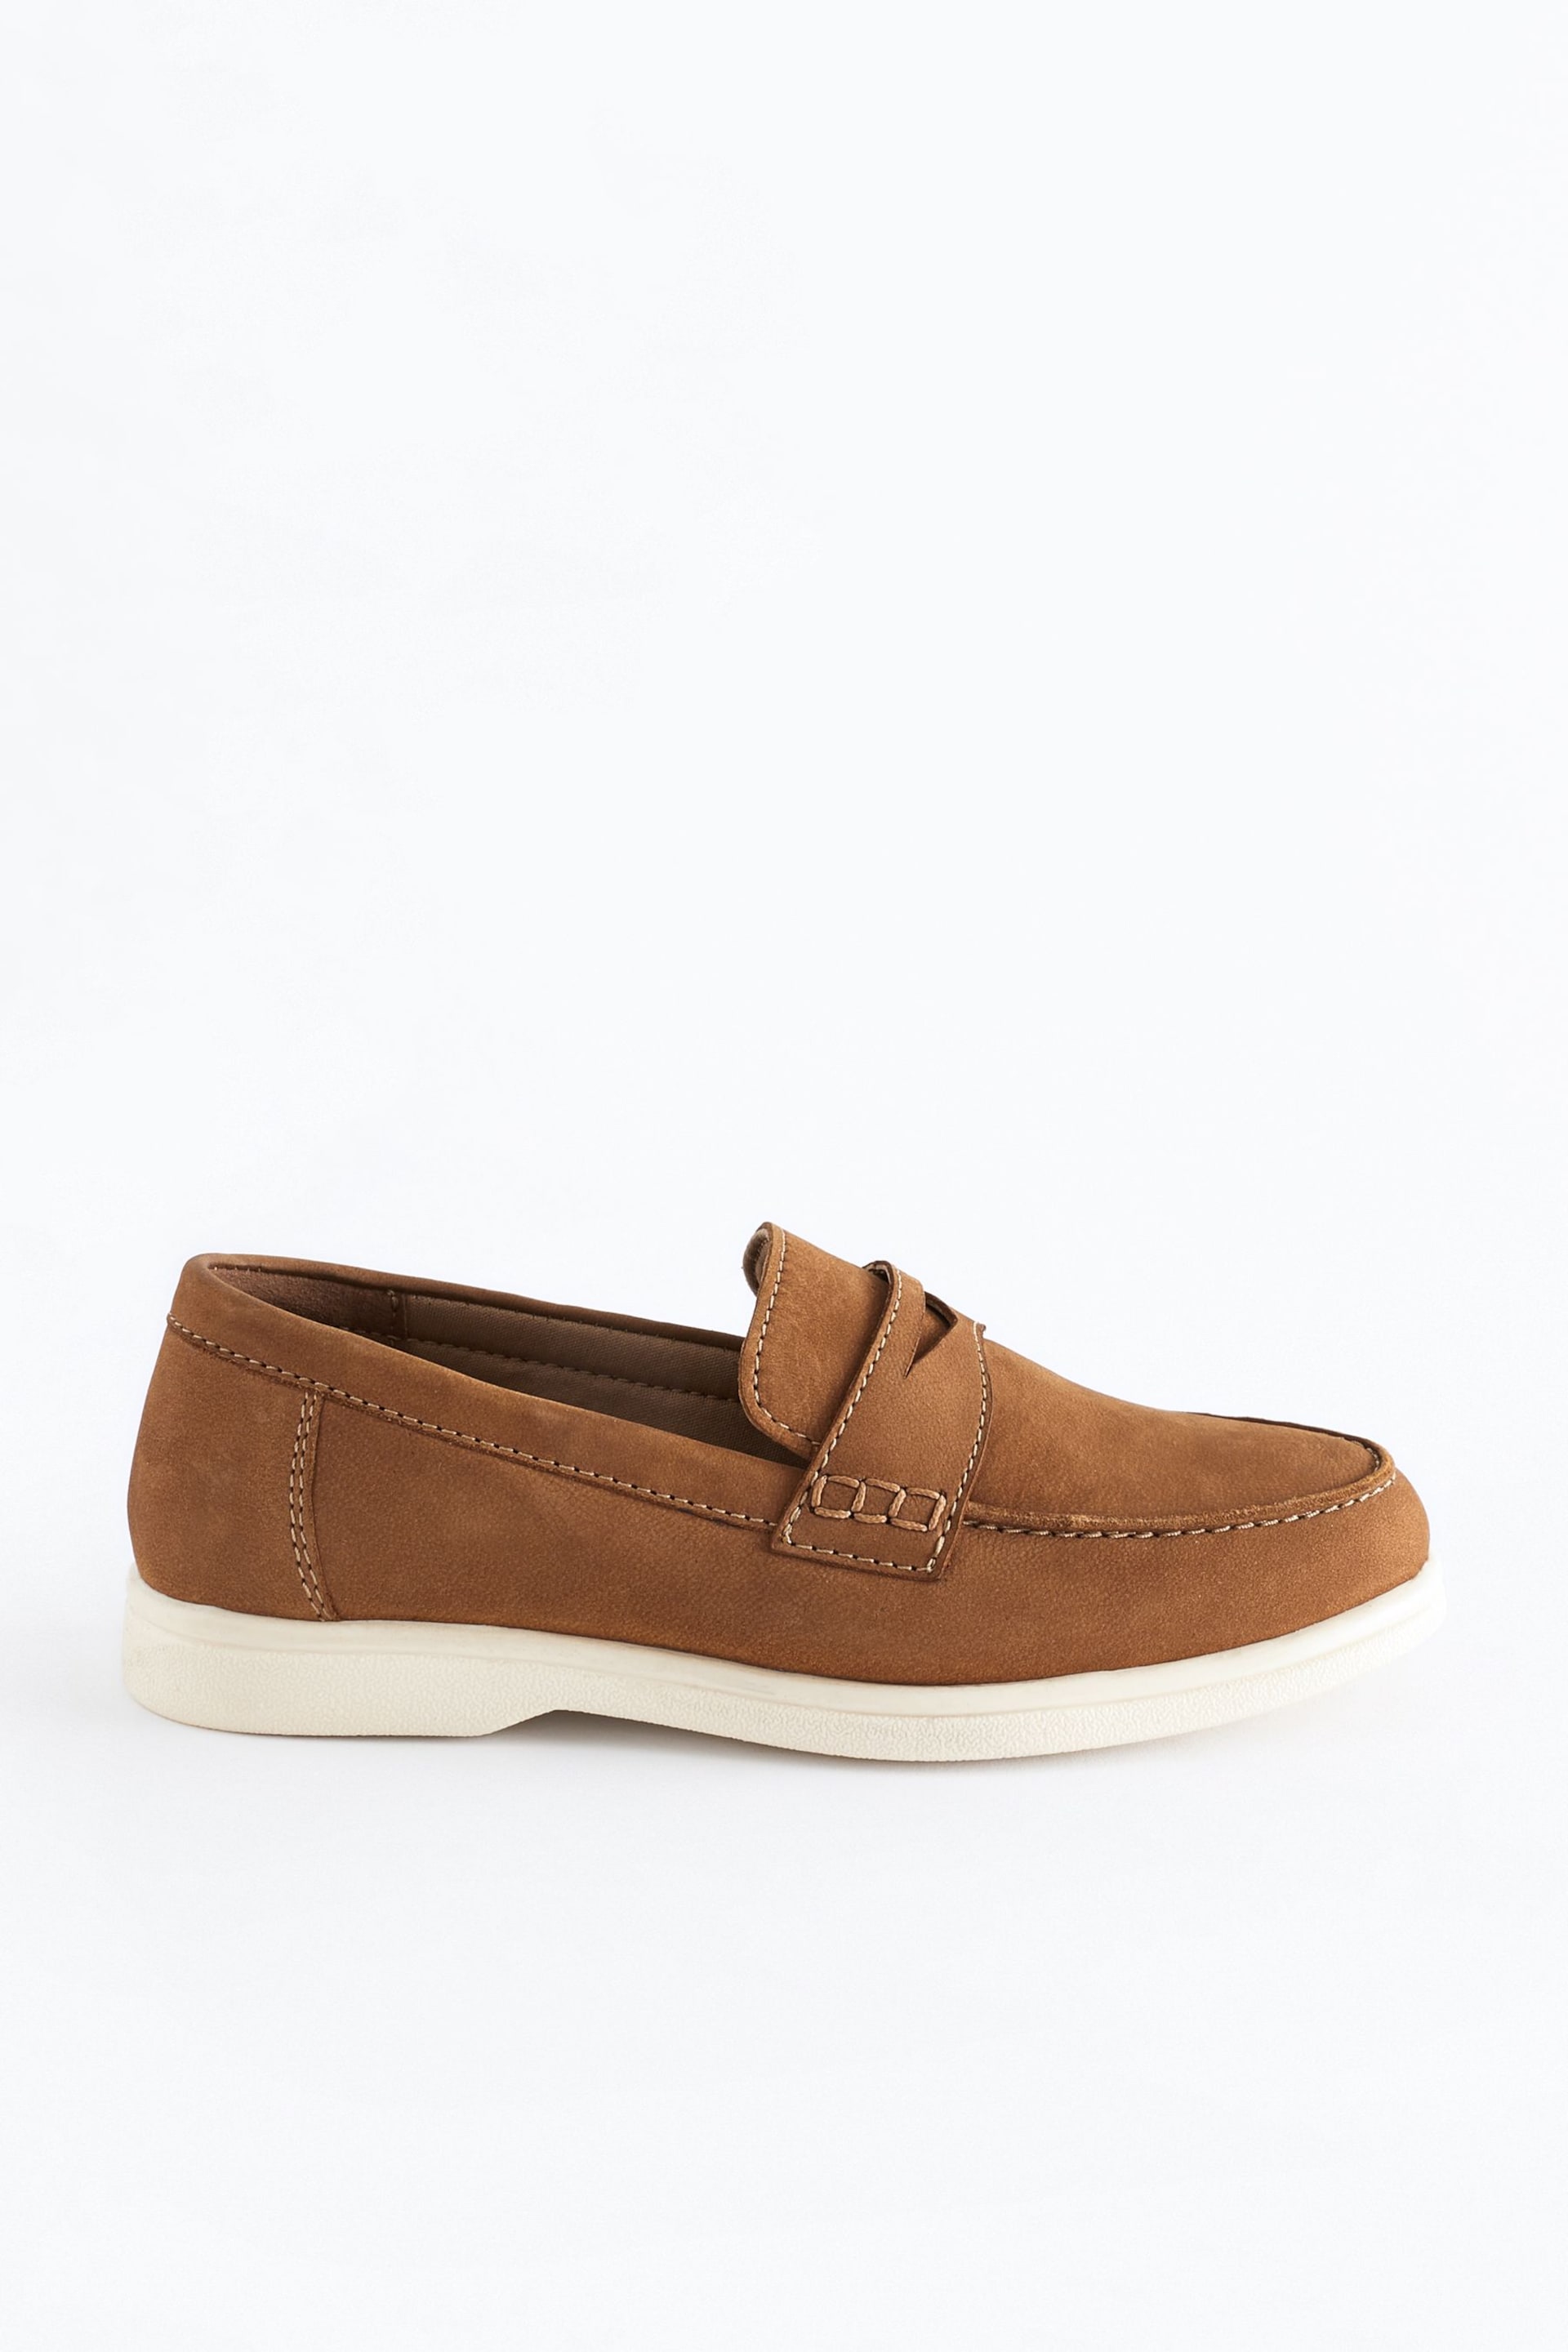 Tan Brown Contrast Sole Leather Penny Loafers - Image 2 of 6